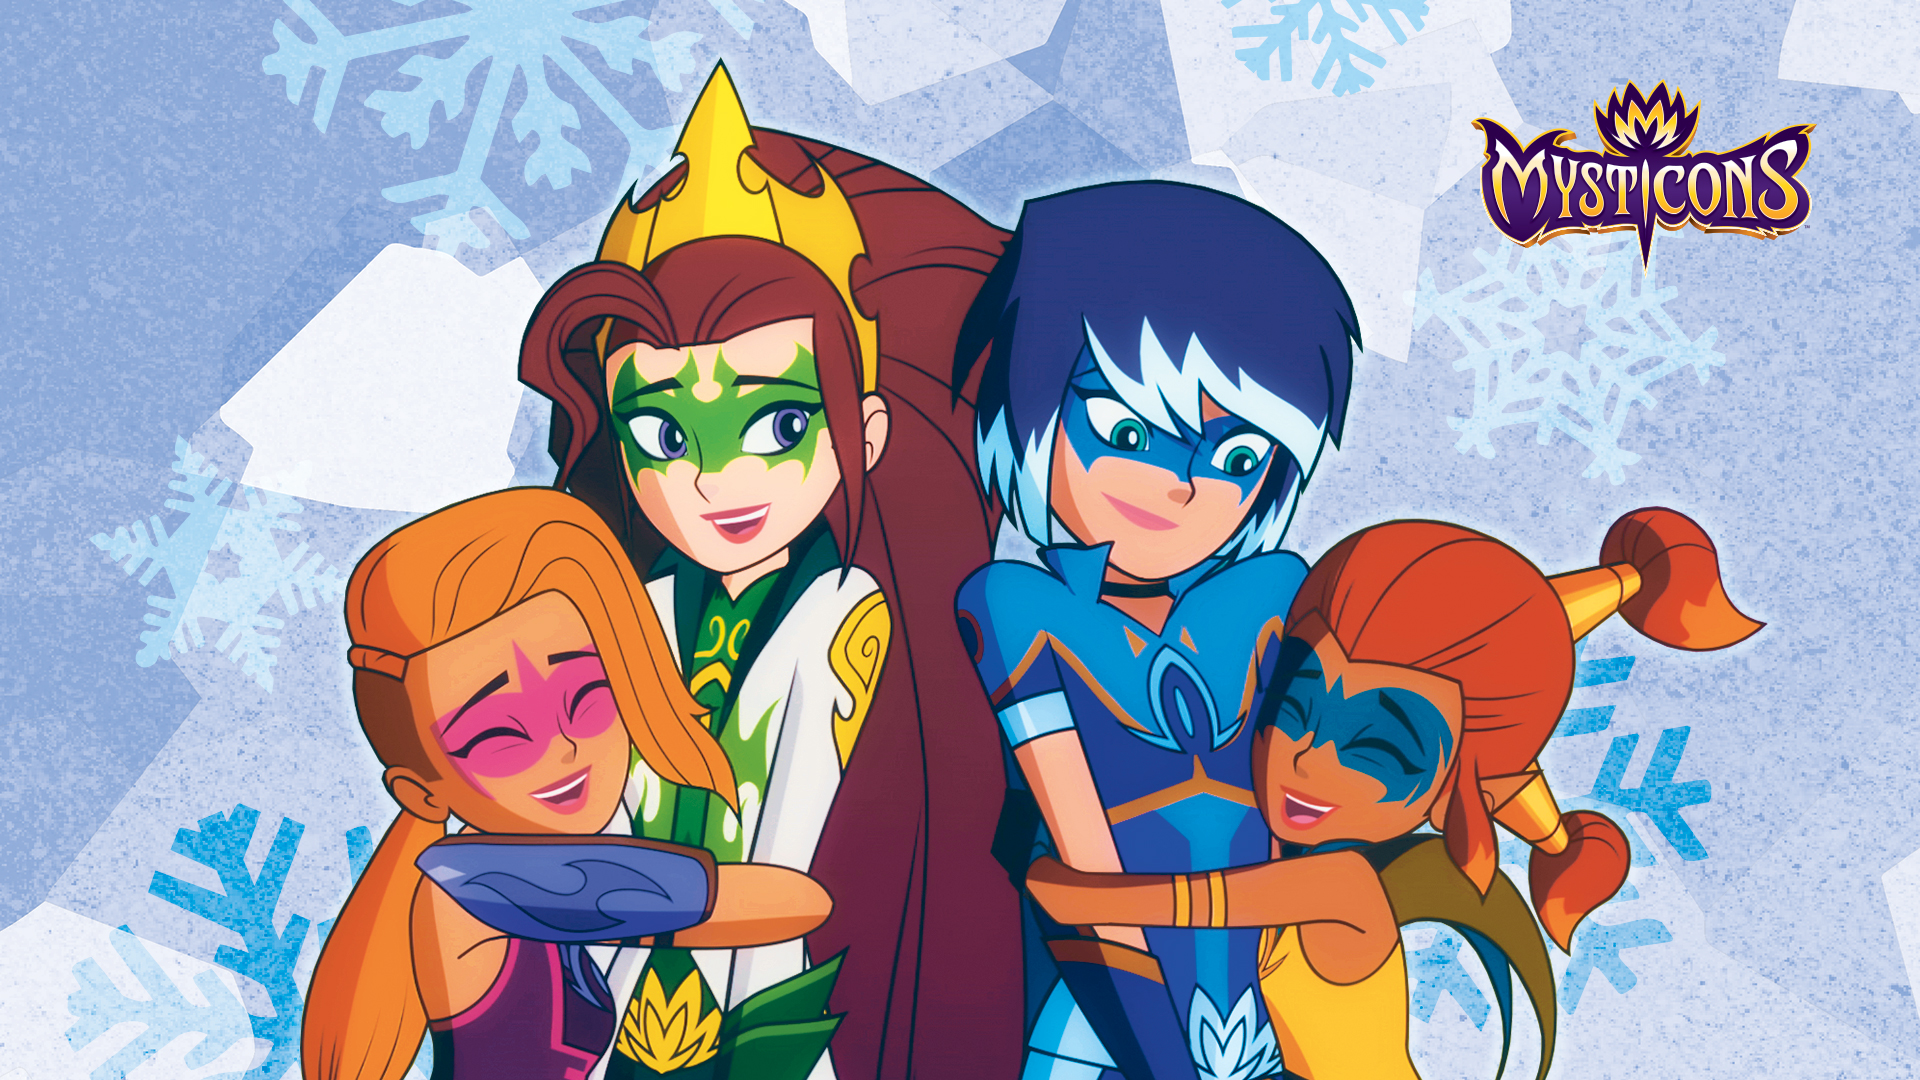 Mysticon Christas Winter Holidays Wallpapers - Dessin Anime Les Mysticons - HD Wallpaper 